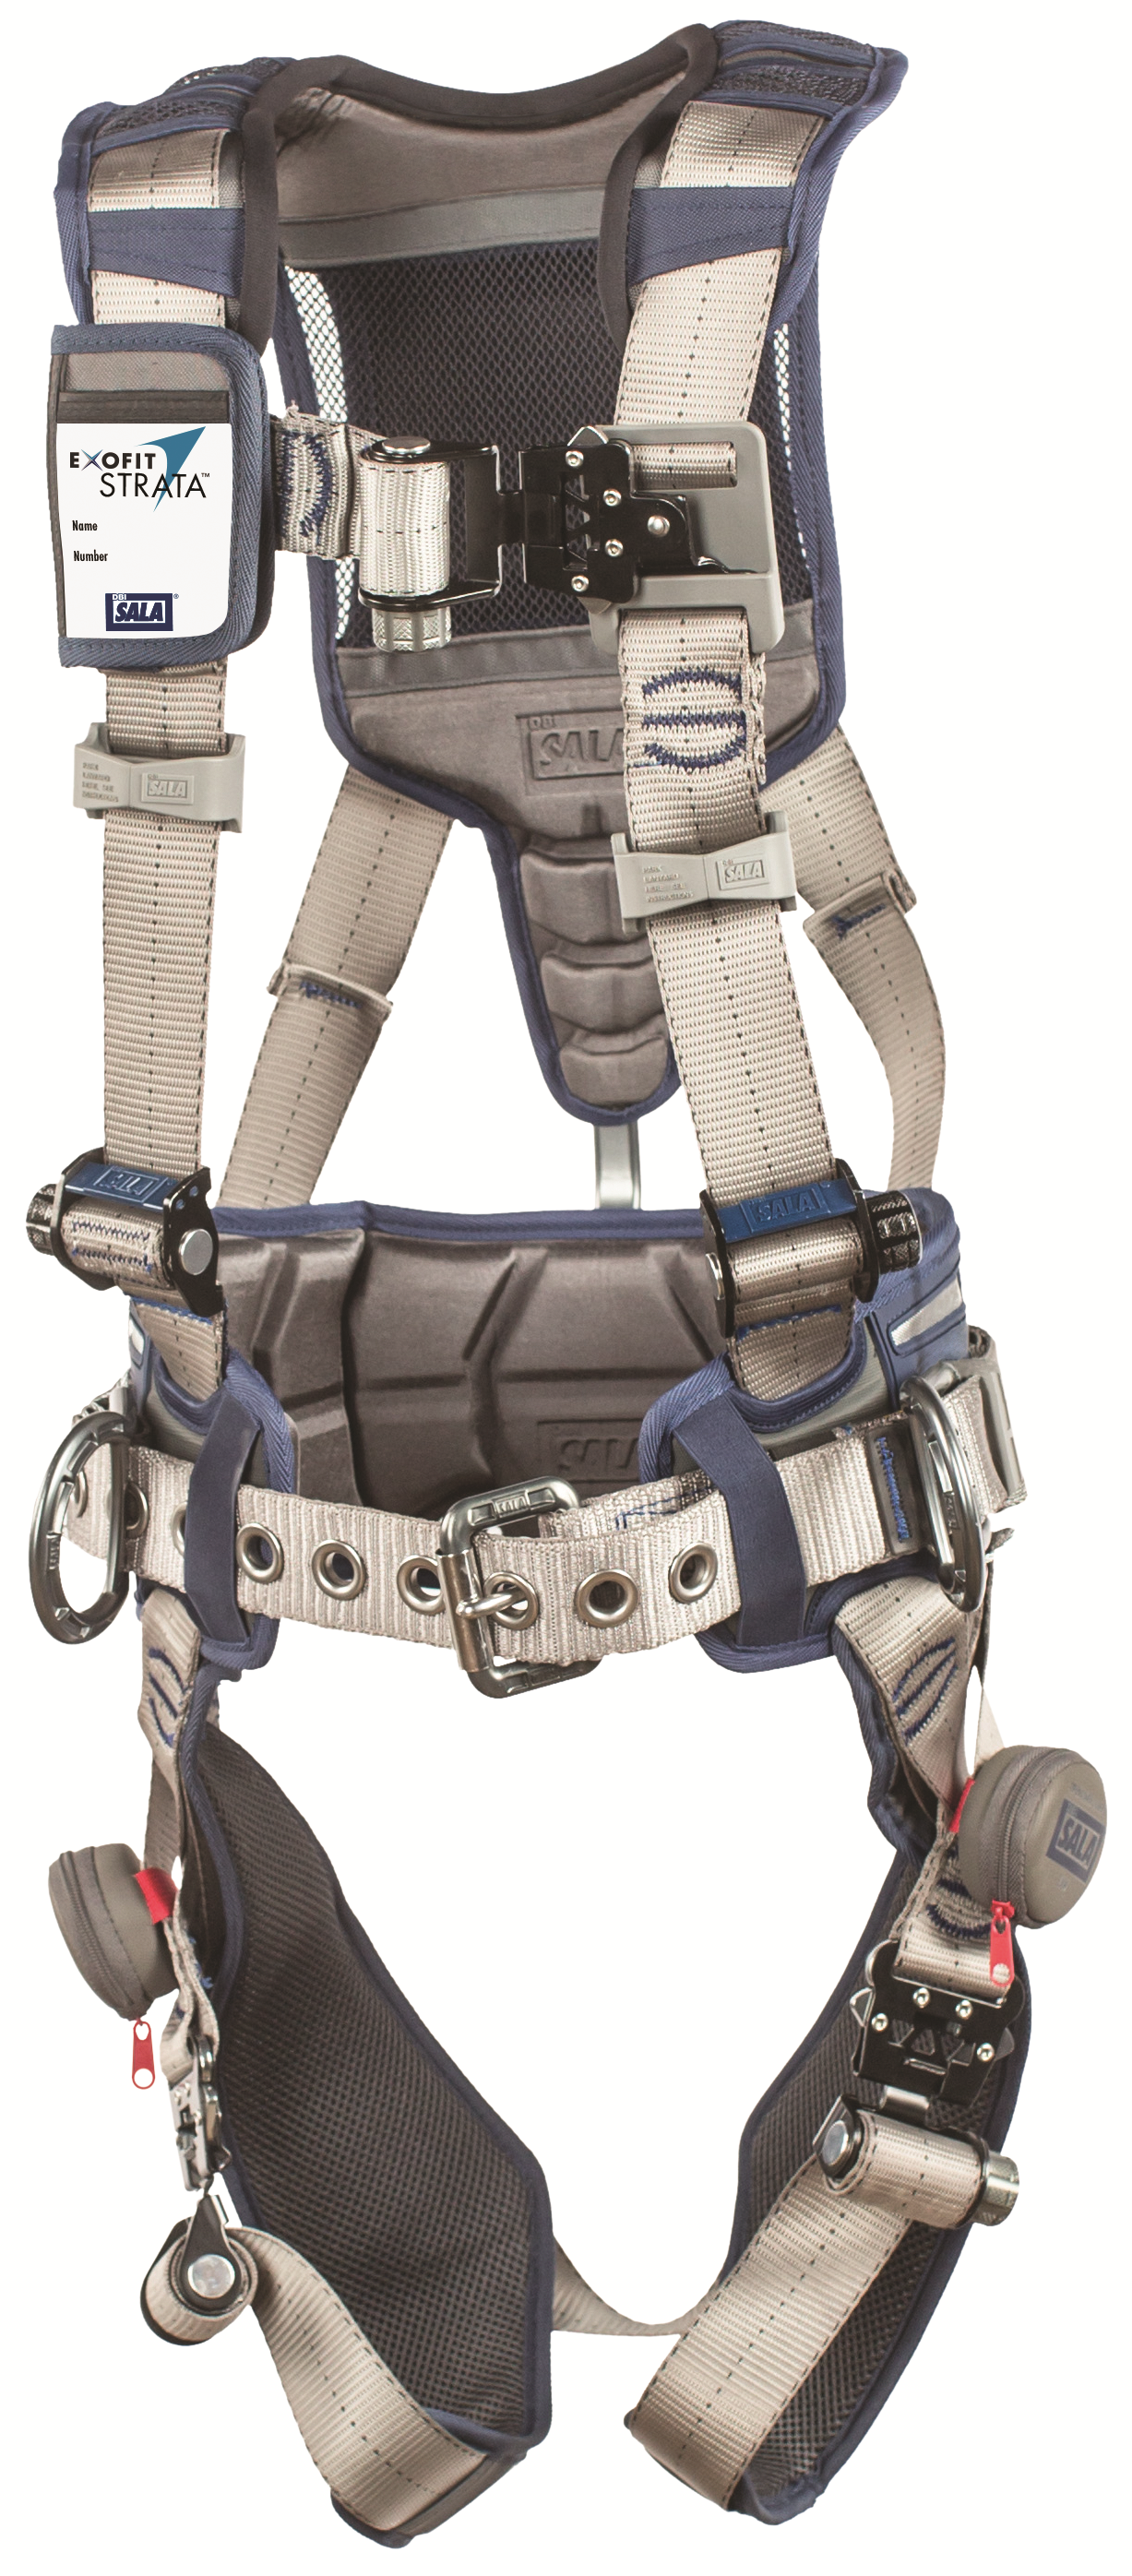 https://www.engineeredfallprotection.com/store/images/thumbs/0000611_3m-dbi-sala-exofit-strata-construction-harness-triple-action-chest-and-leg-buckles-side-d-rings.png